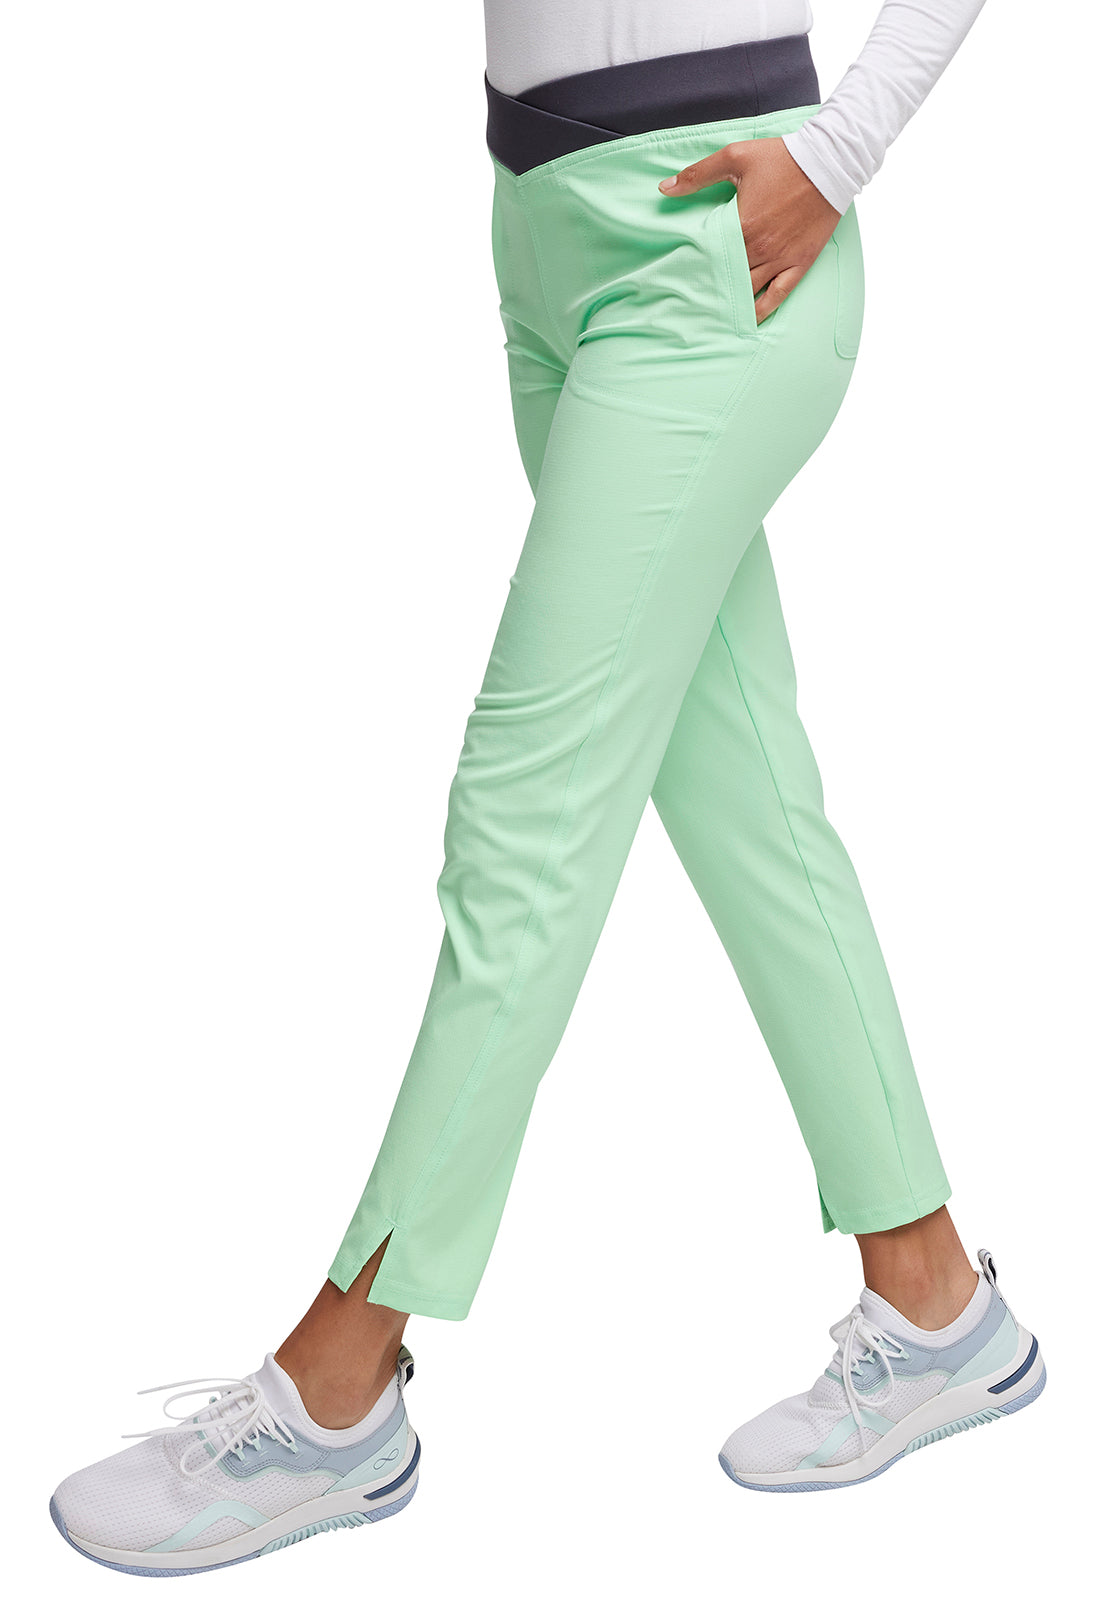 Heart & Soul Packable Pull On Pants (5 Colors Up to 3XL) – Berani Femme  Couture Scrubwear & Medical Supply